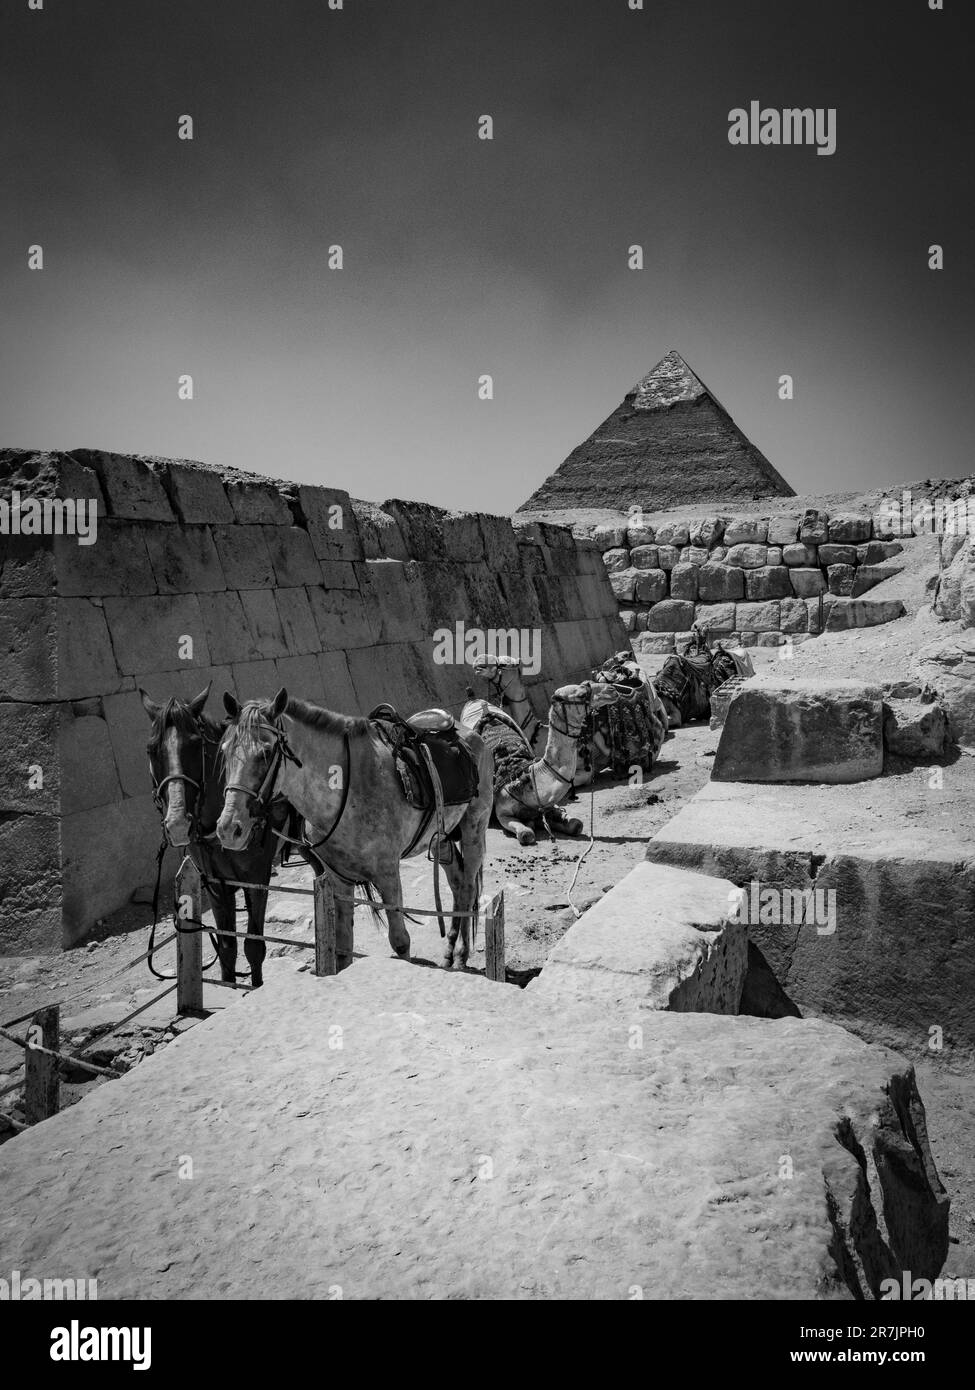 Egypts Iconic Pyramids and Ancient History Come to Life in Monoc Stock Photo